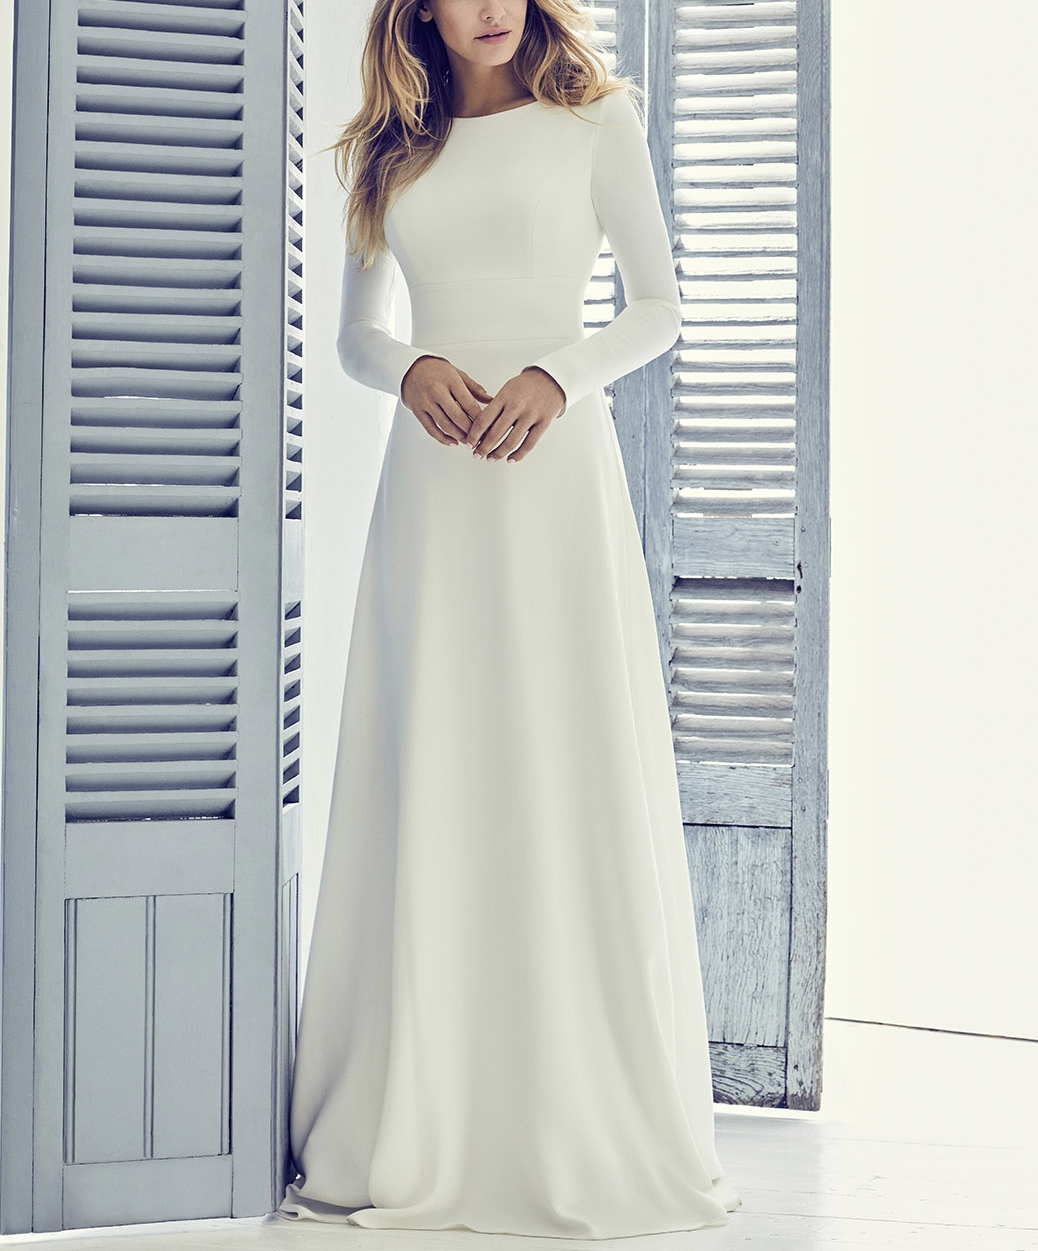 New Stretch Crepe A-line Long Modest Wedding Dress 2020 With Long Sleeves Jewel Coverd Back Short Train Women Informal Modest Bridal Gown